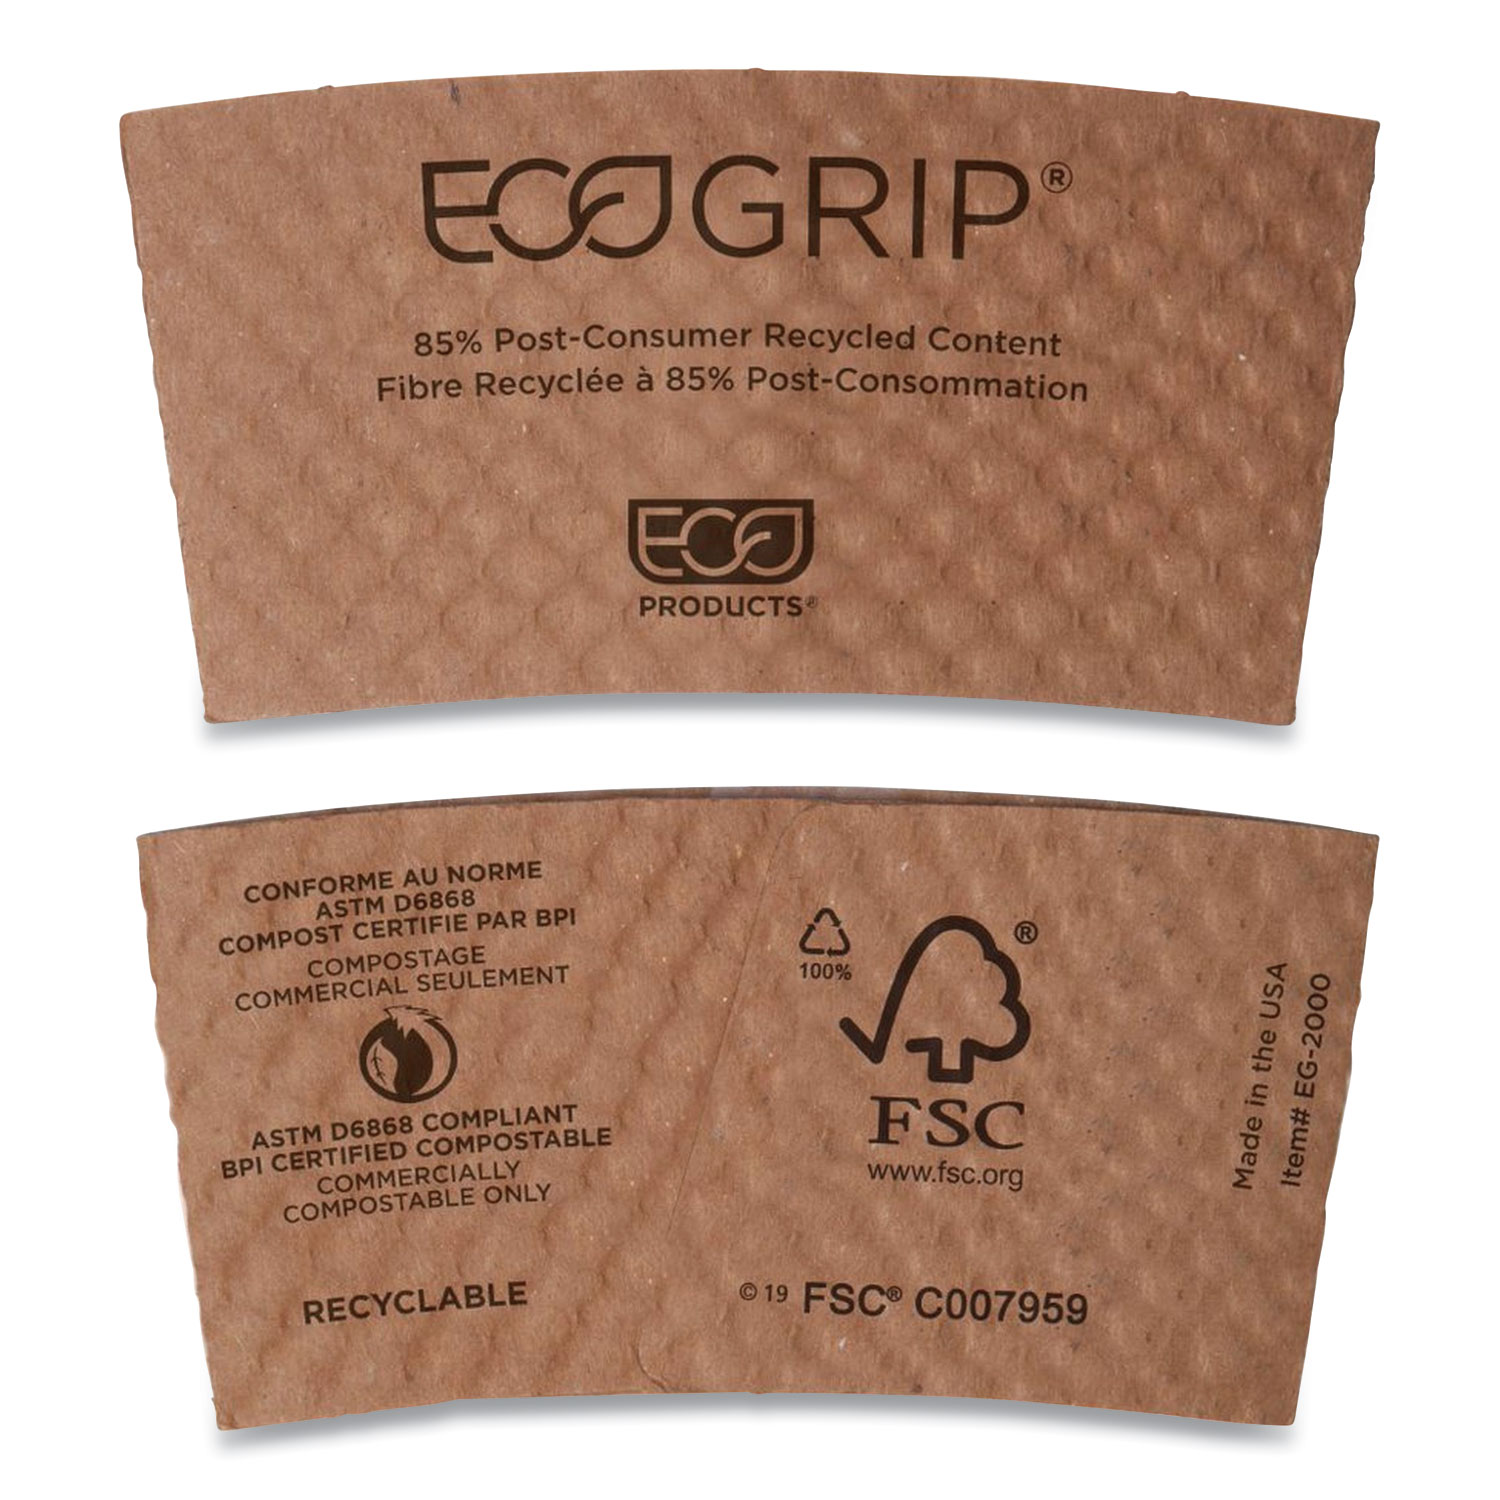  Eco-Products EG-2000 EcoGrip Hot Cup Sleeves - Renewable & Compostable, 1300/CT (ECOEG2000) 